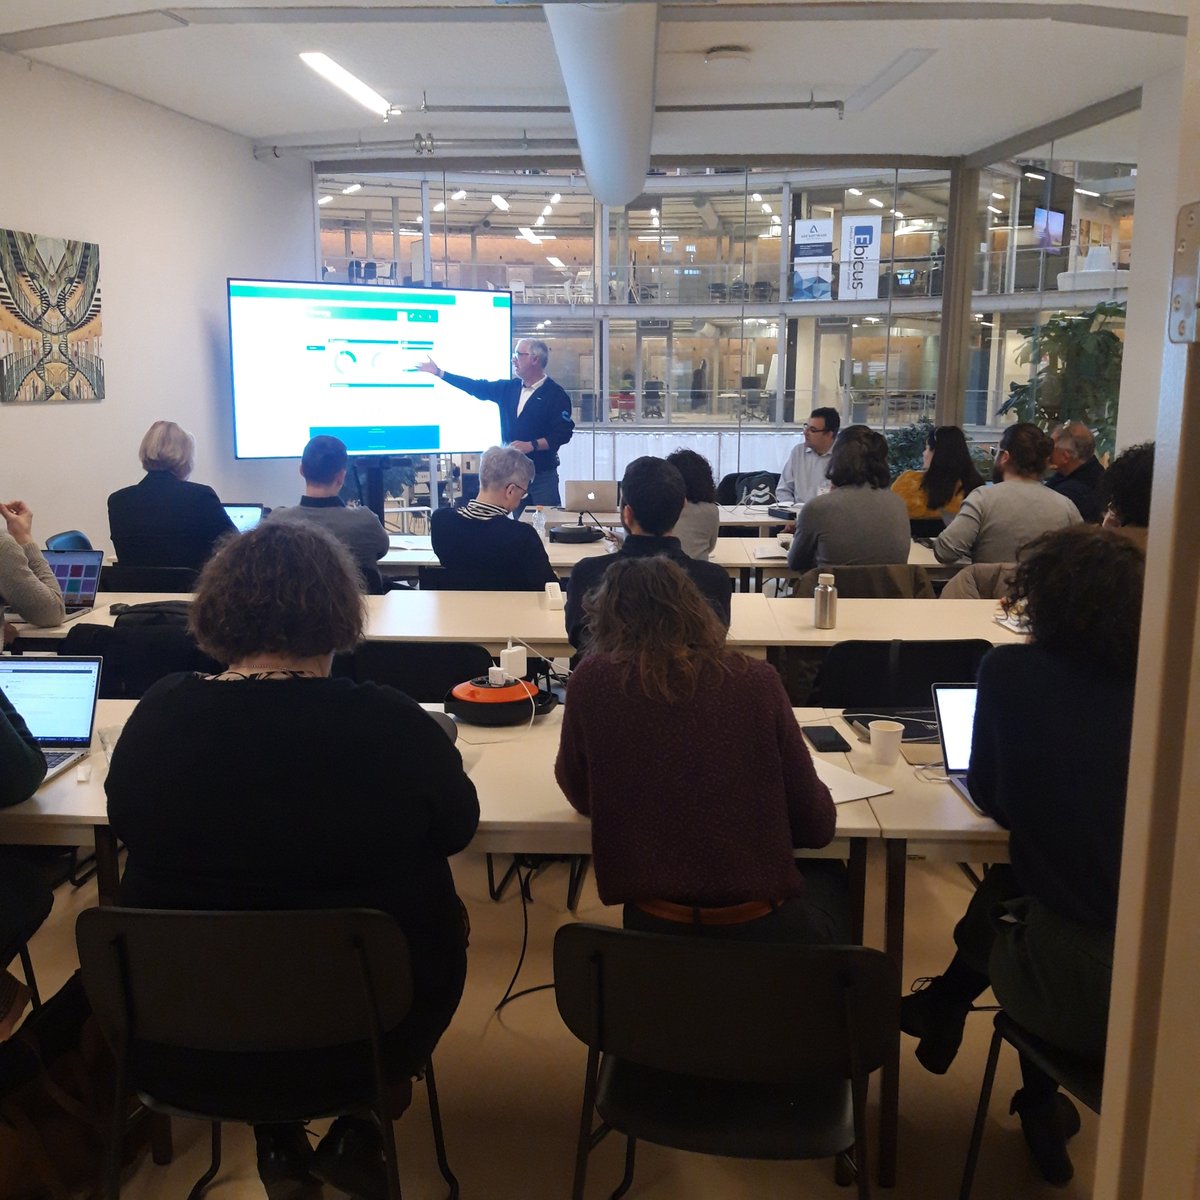 Sharing experiences on our #livinglab approach with SME's, growers, policy makers and other stakeholders within projects and trials during the #Cities2030 annual meeting in @CupolaXS. Learning how to improve strategies for generating sustainable and resilient #CFRS.